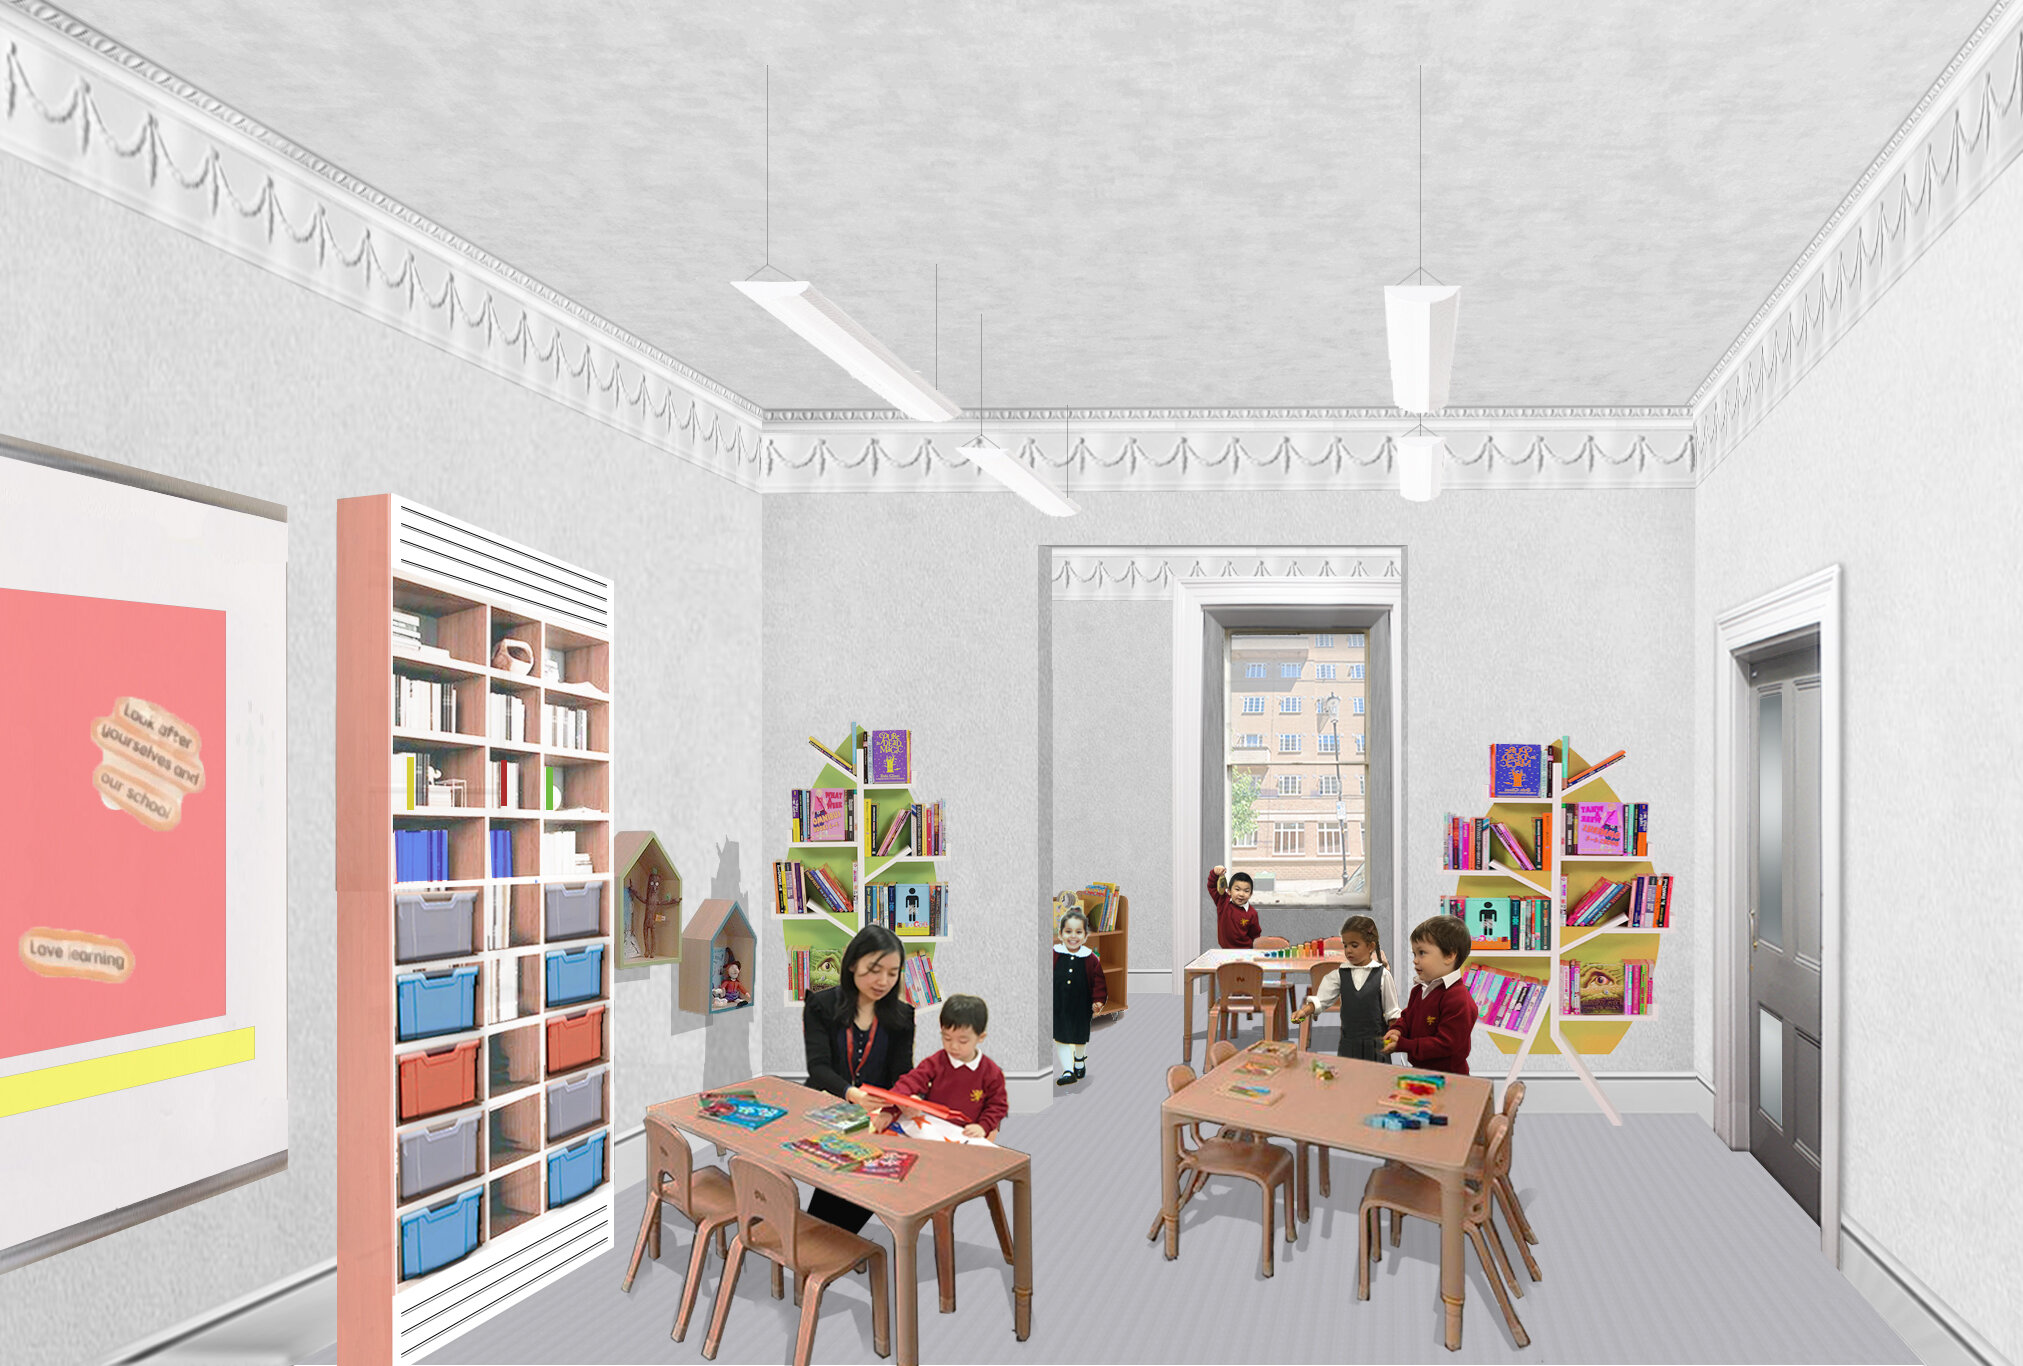 17015_Proposed classroom view_op.1 with low and high level ventilation joinery unit covering window_DRAFT 27 08 19.jpg